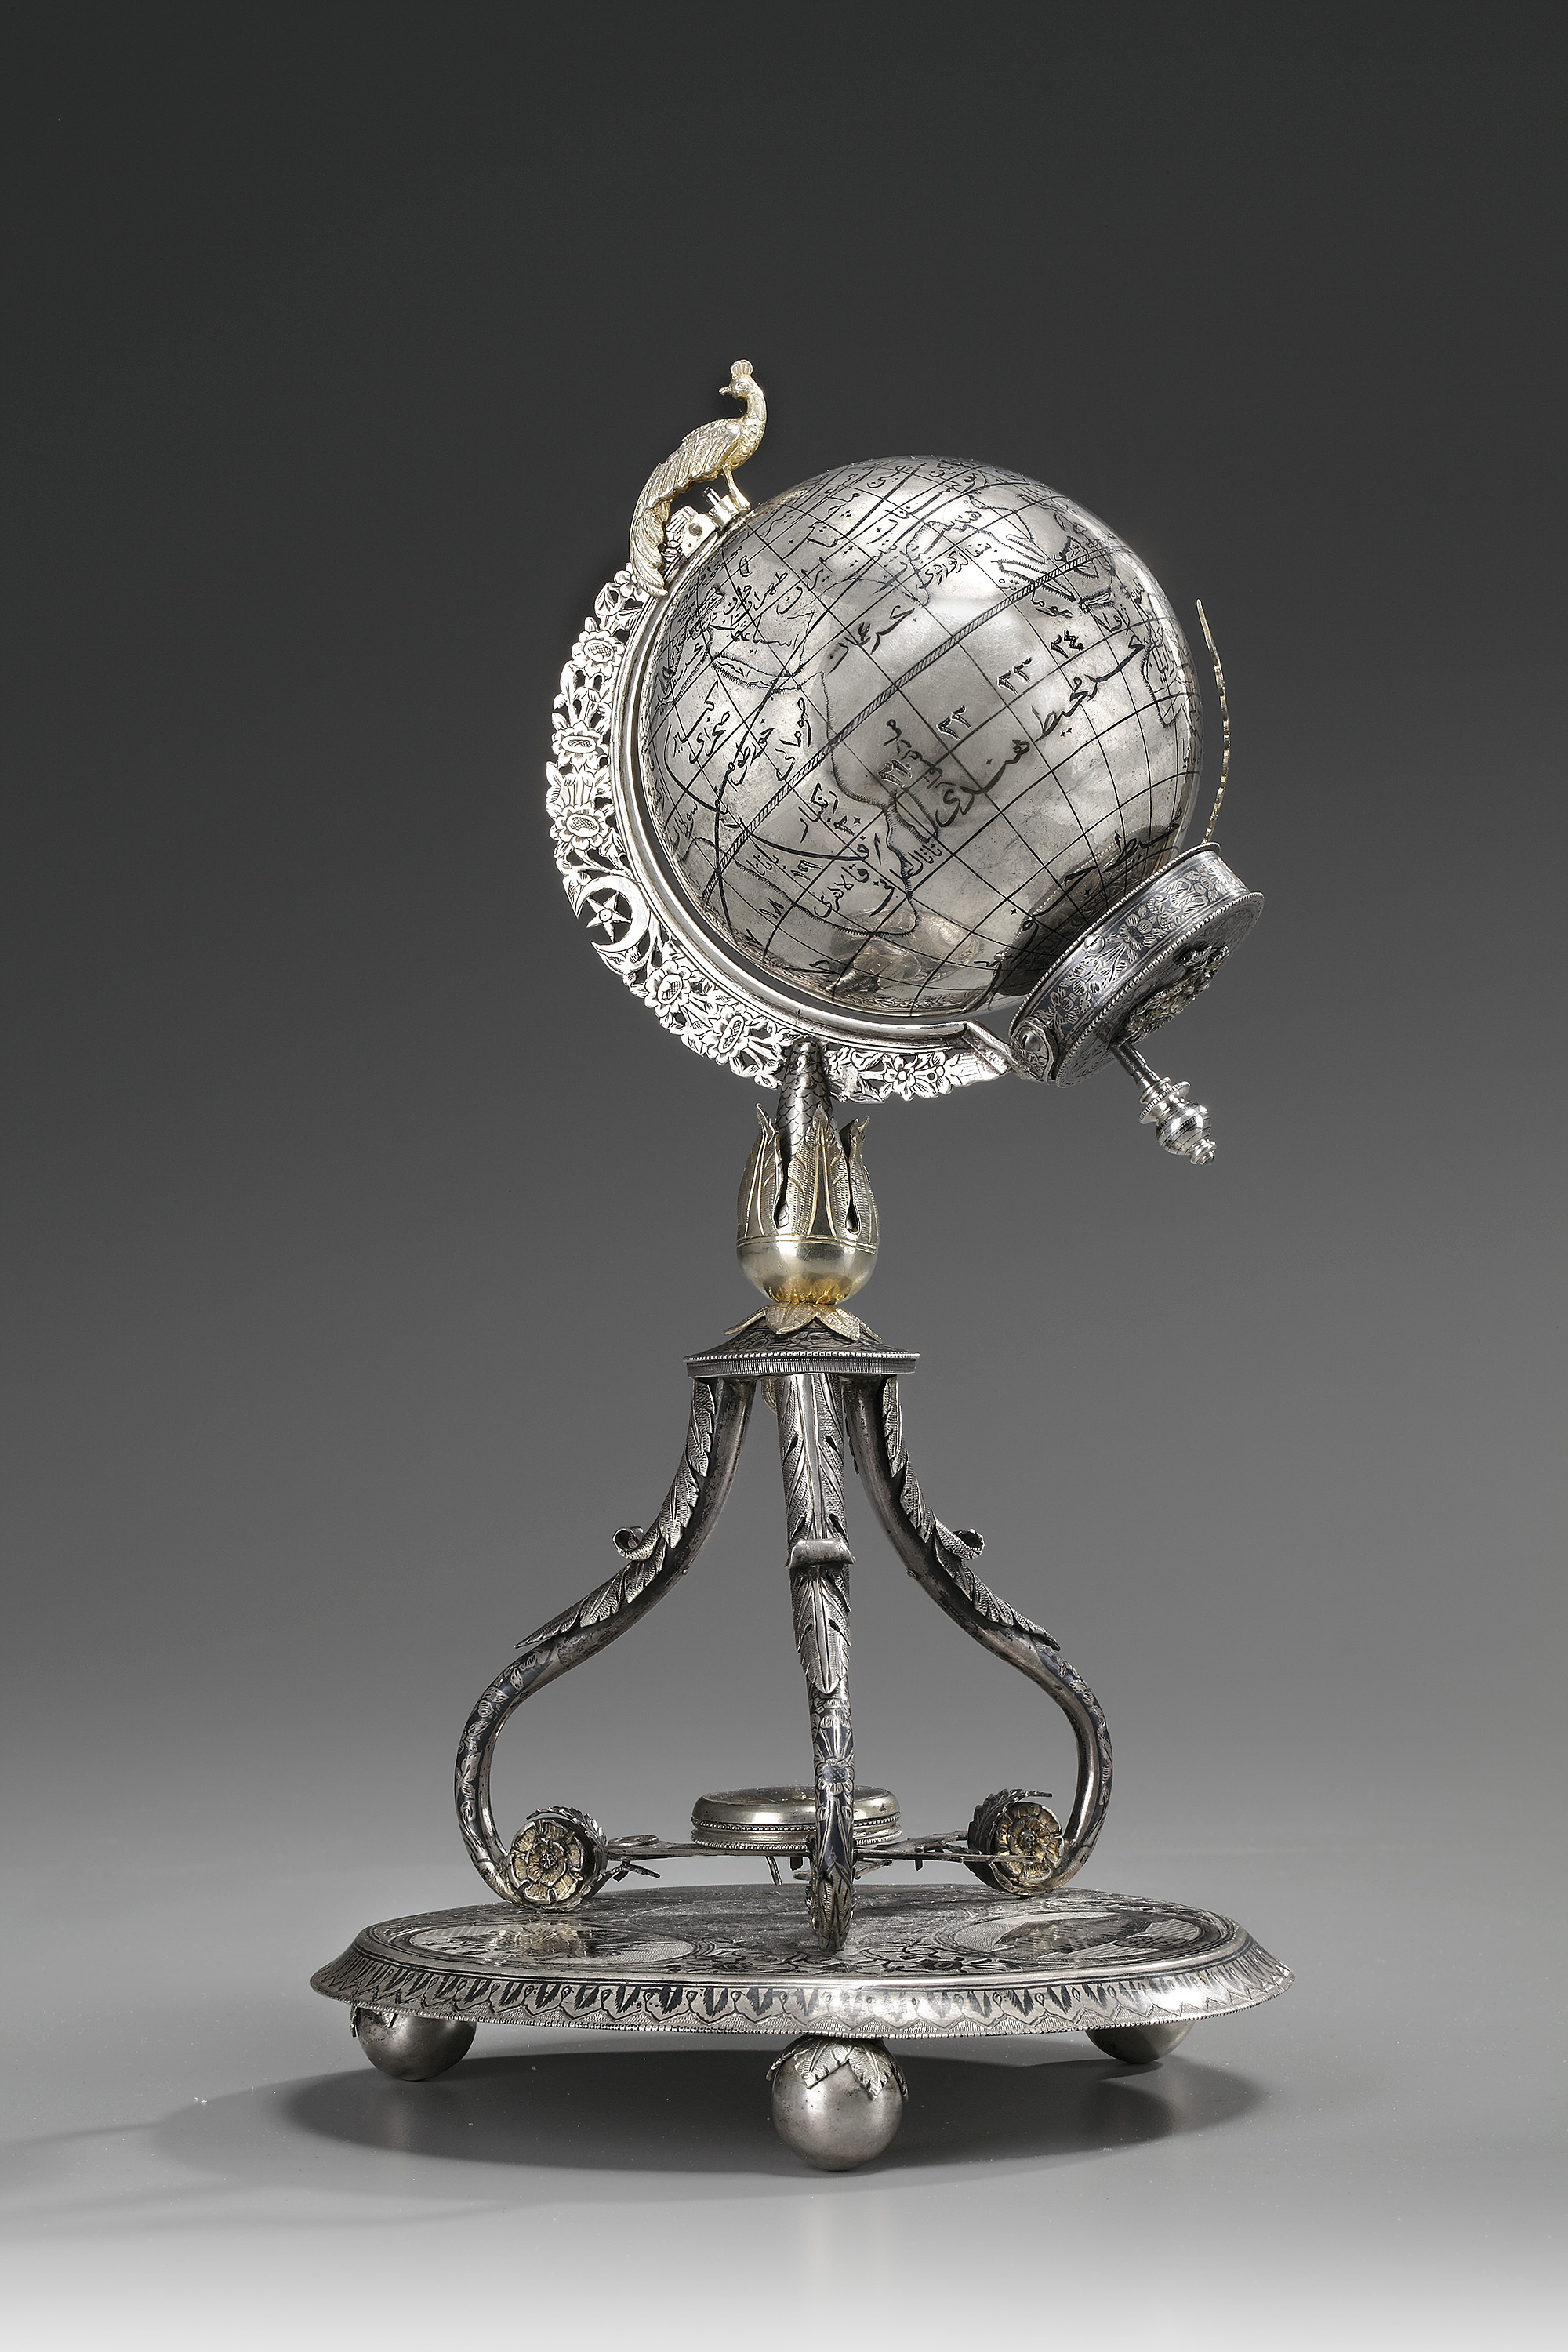 AN OTTOMAN SILVER, NIELLOED AND ENGRAVED GLOBE CLOCK BEARING THE TUGHRA OF SULTAN ABDULHAMID II TURK - Image 6 of 18